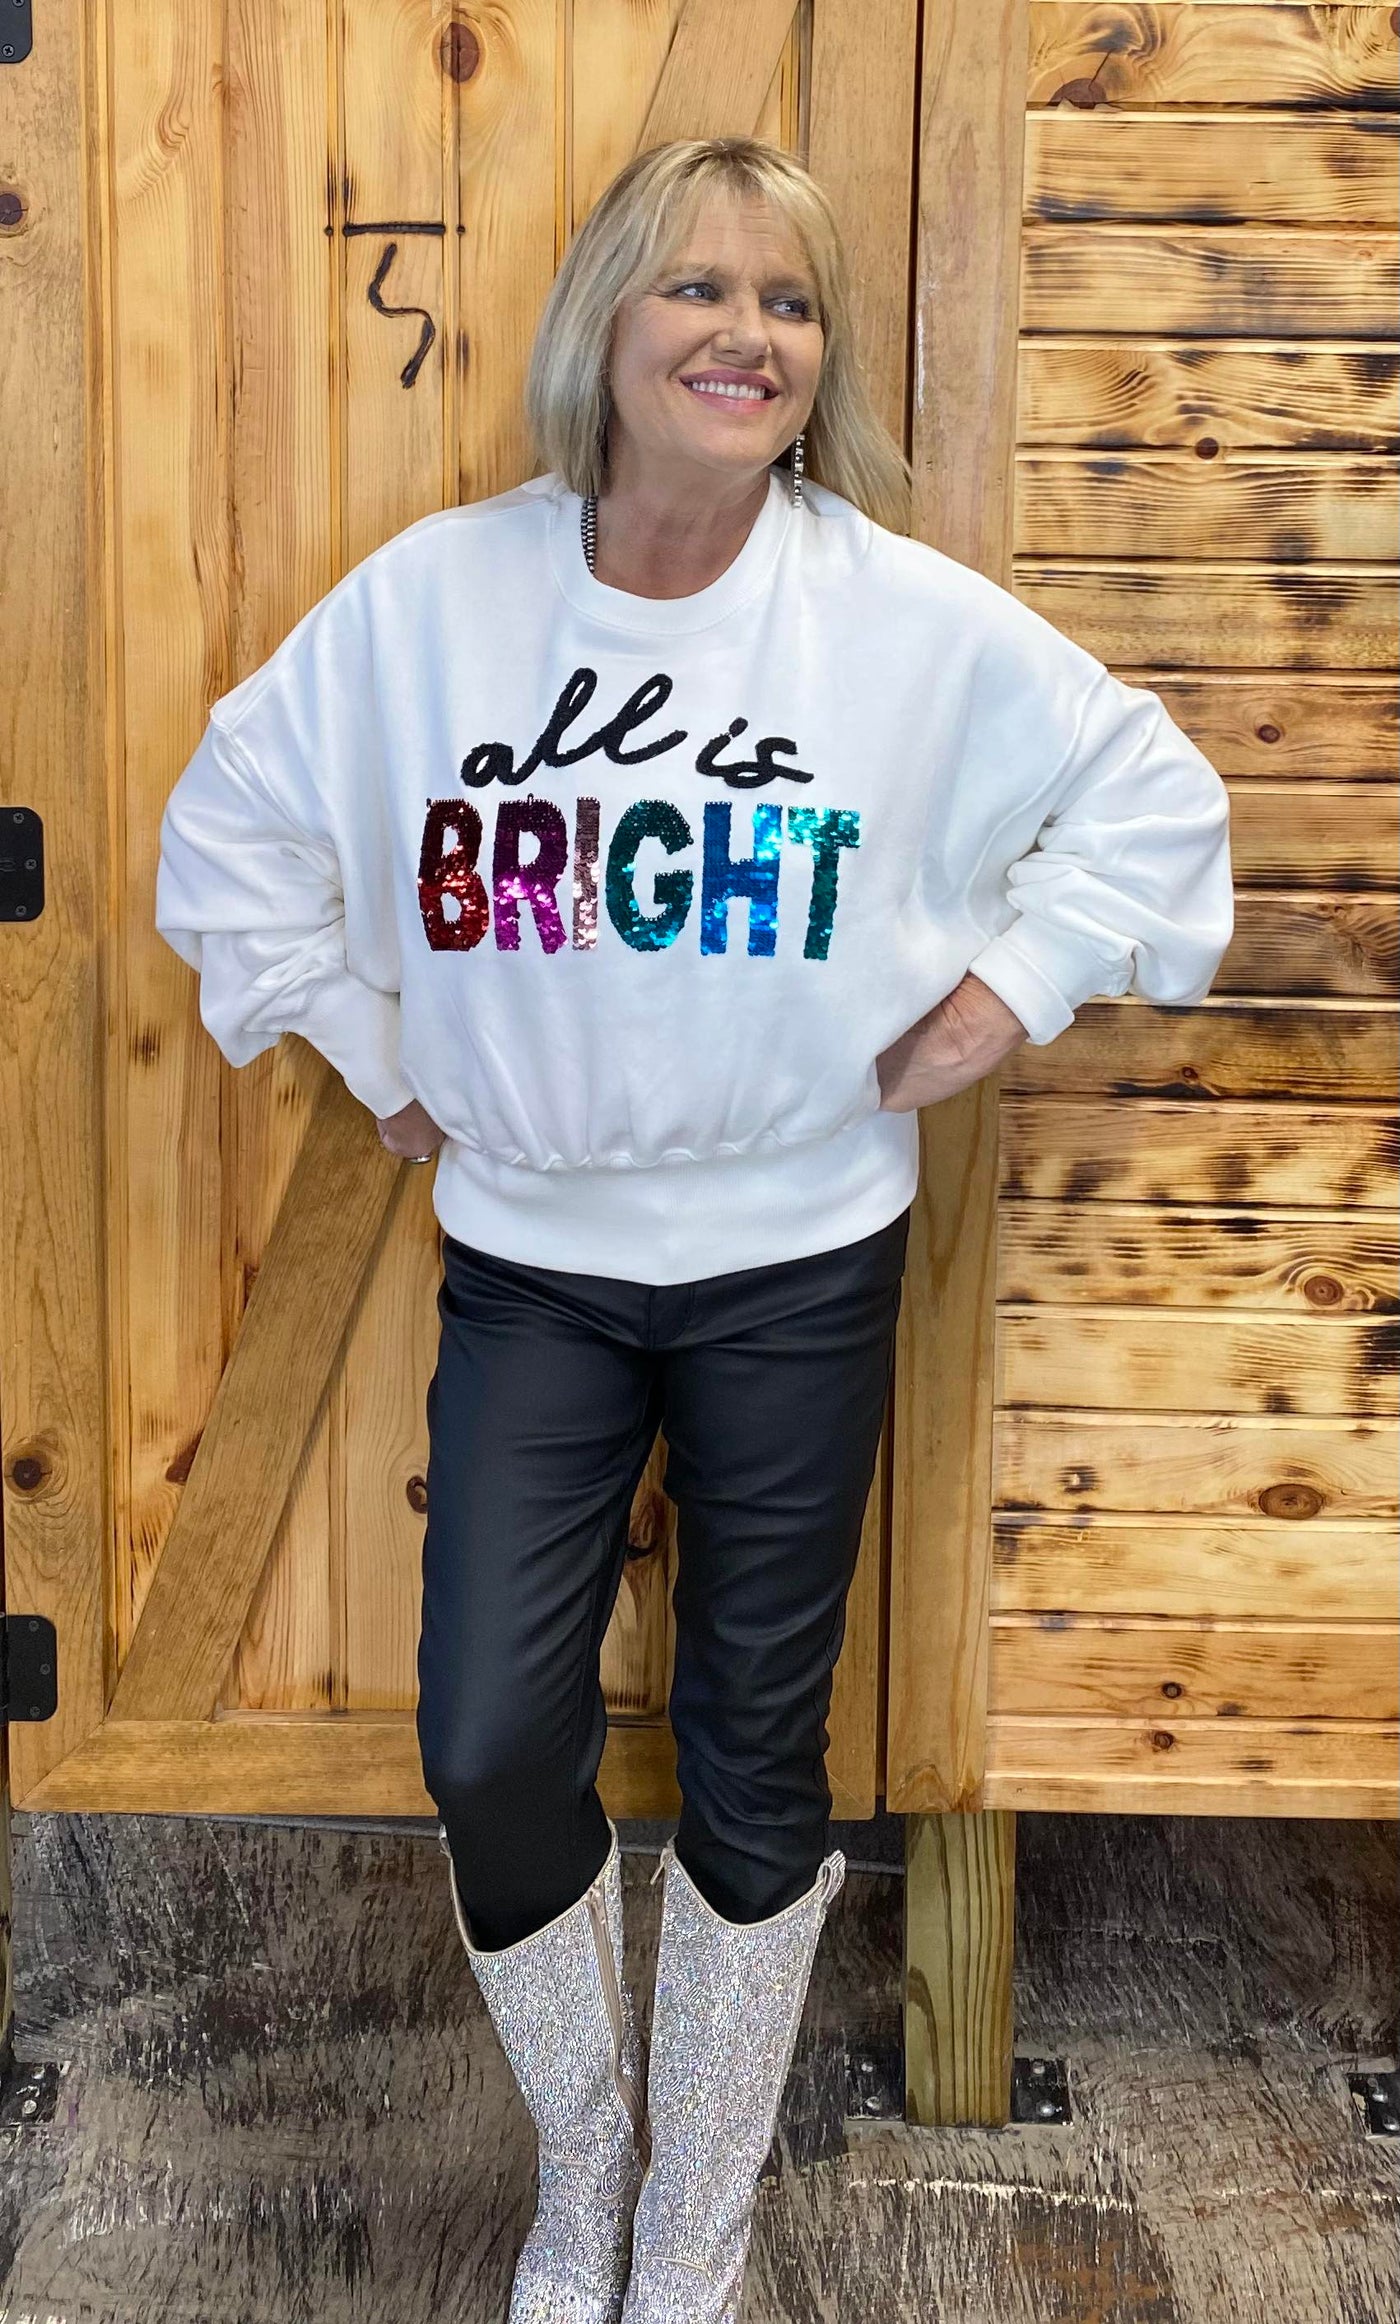 All is Bright Sequin & Chenille Sweatshirt from August Bleu